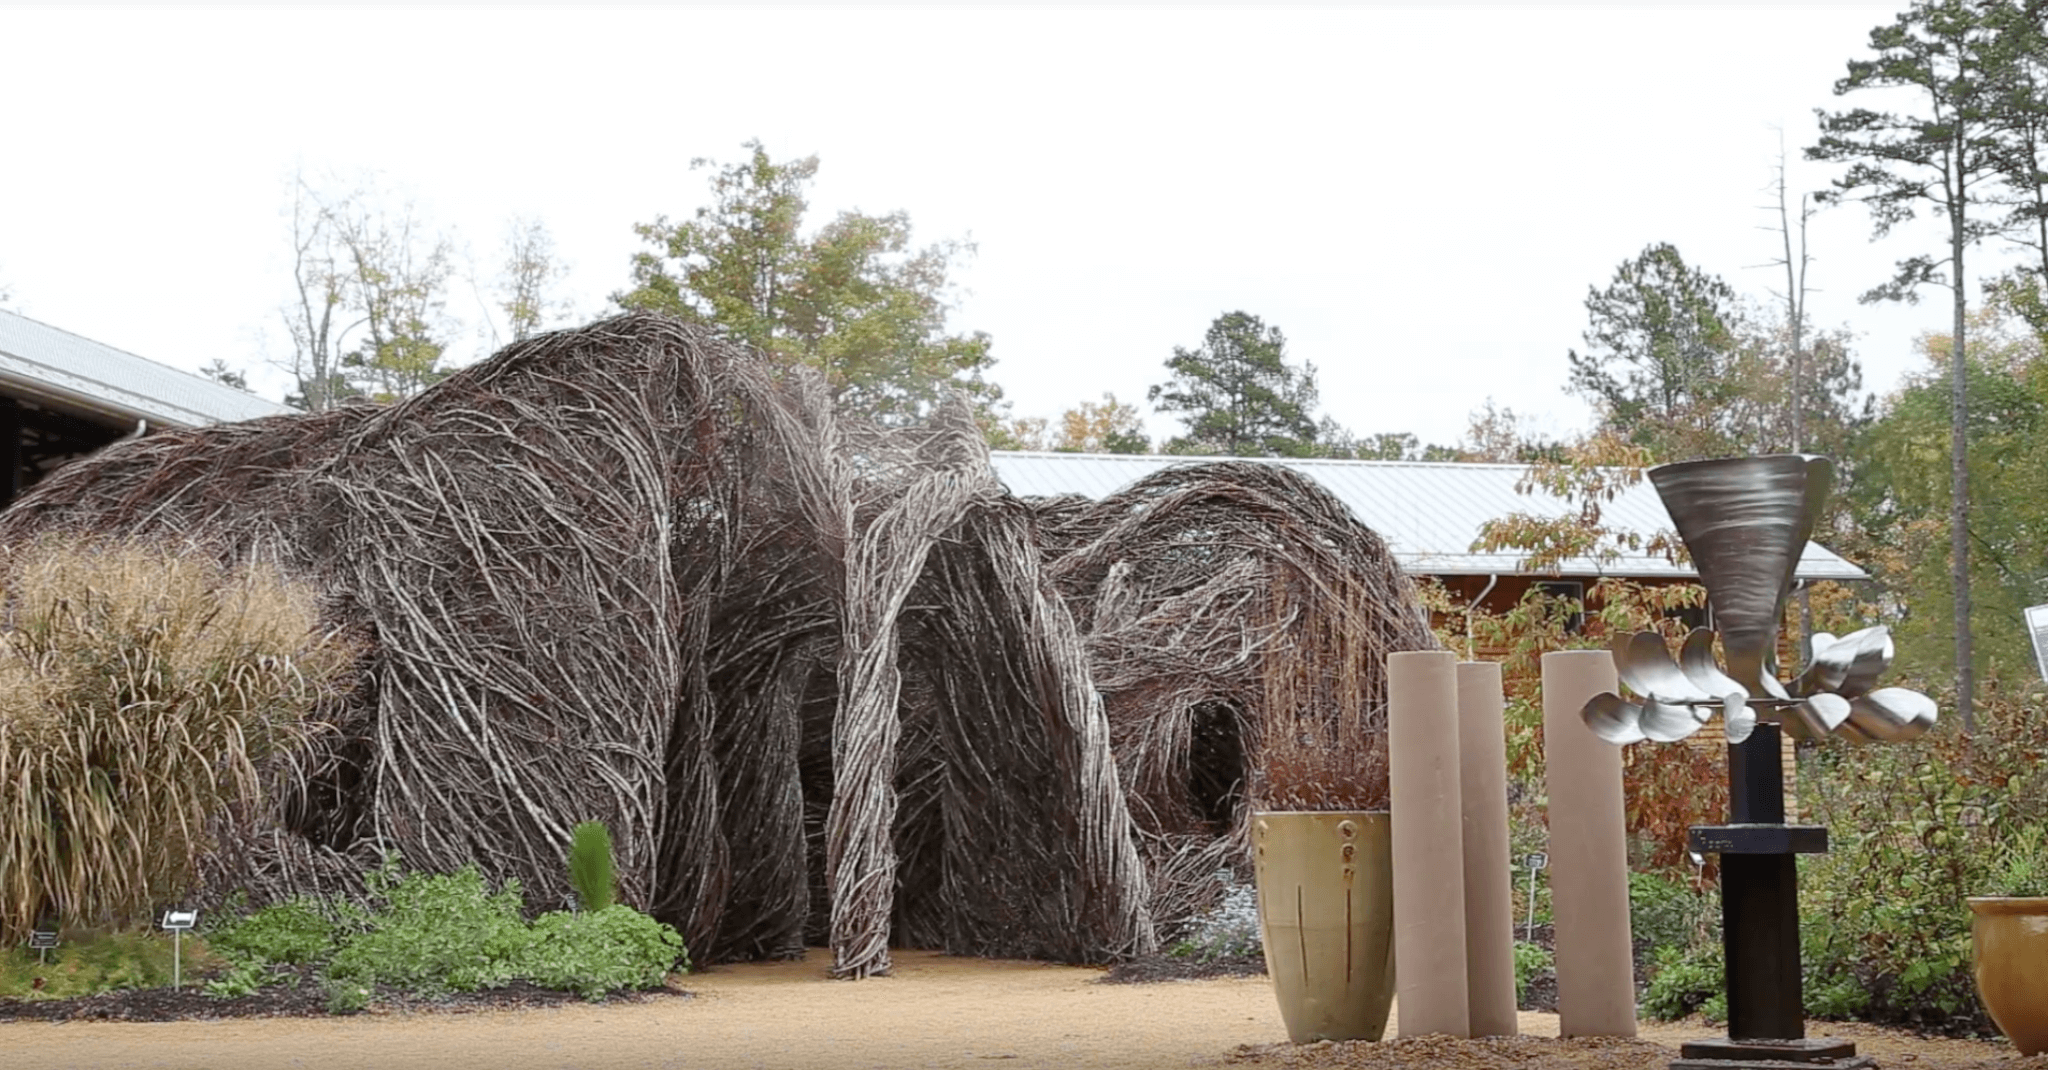 Photo of the completed sculpture by Patrick Dougherty at the North Carolina Botanical Gardens.